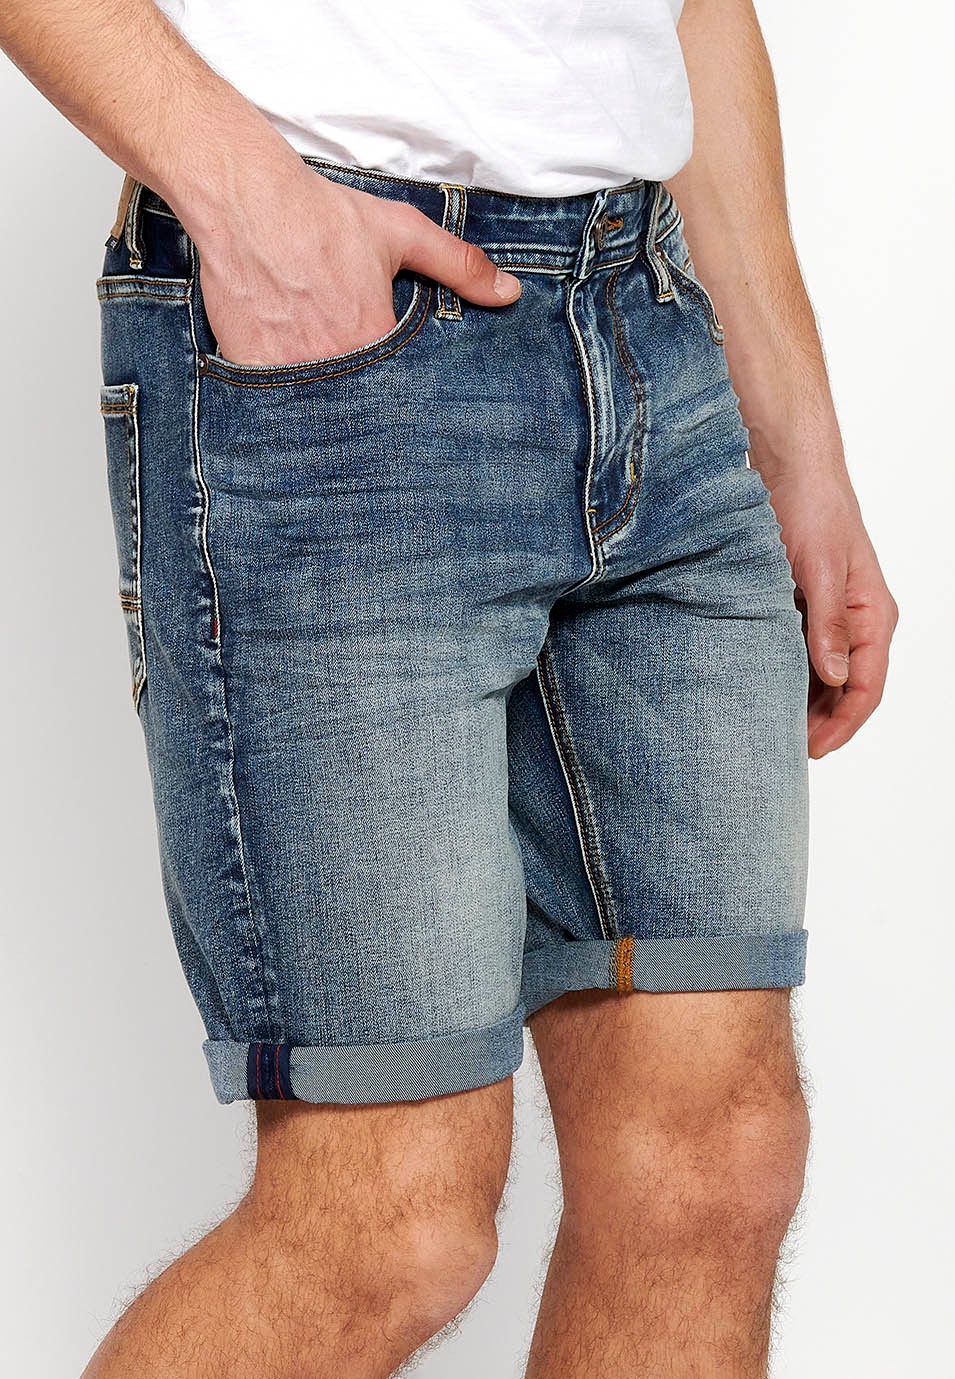 Denim Bermuda Shorts with Front Closure with Zipper and Button with Five Pockets, One Pocket Pocket, Blue Color for Men 4